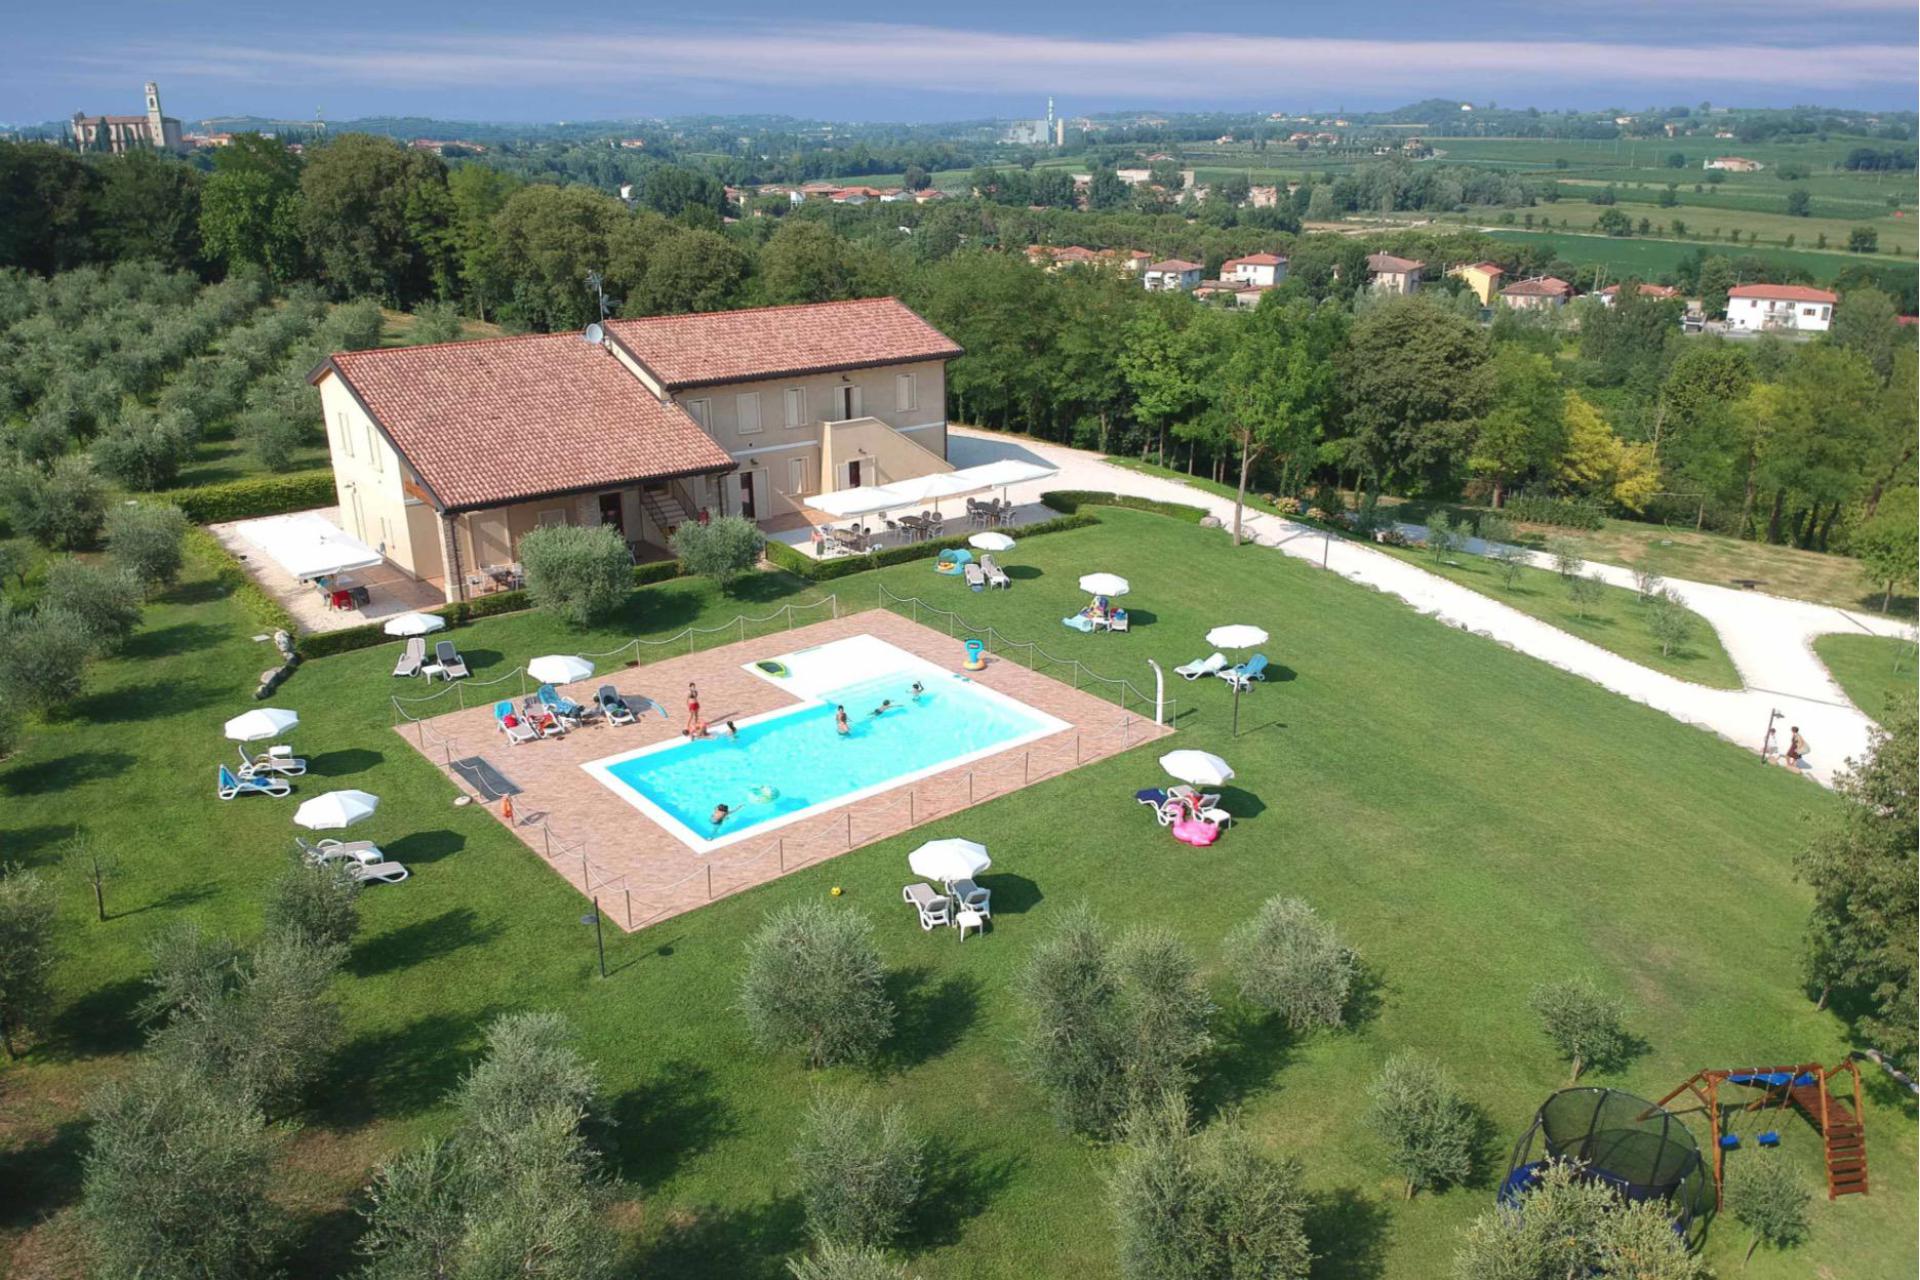 Family-friendly agriturismo within walking distance of a village